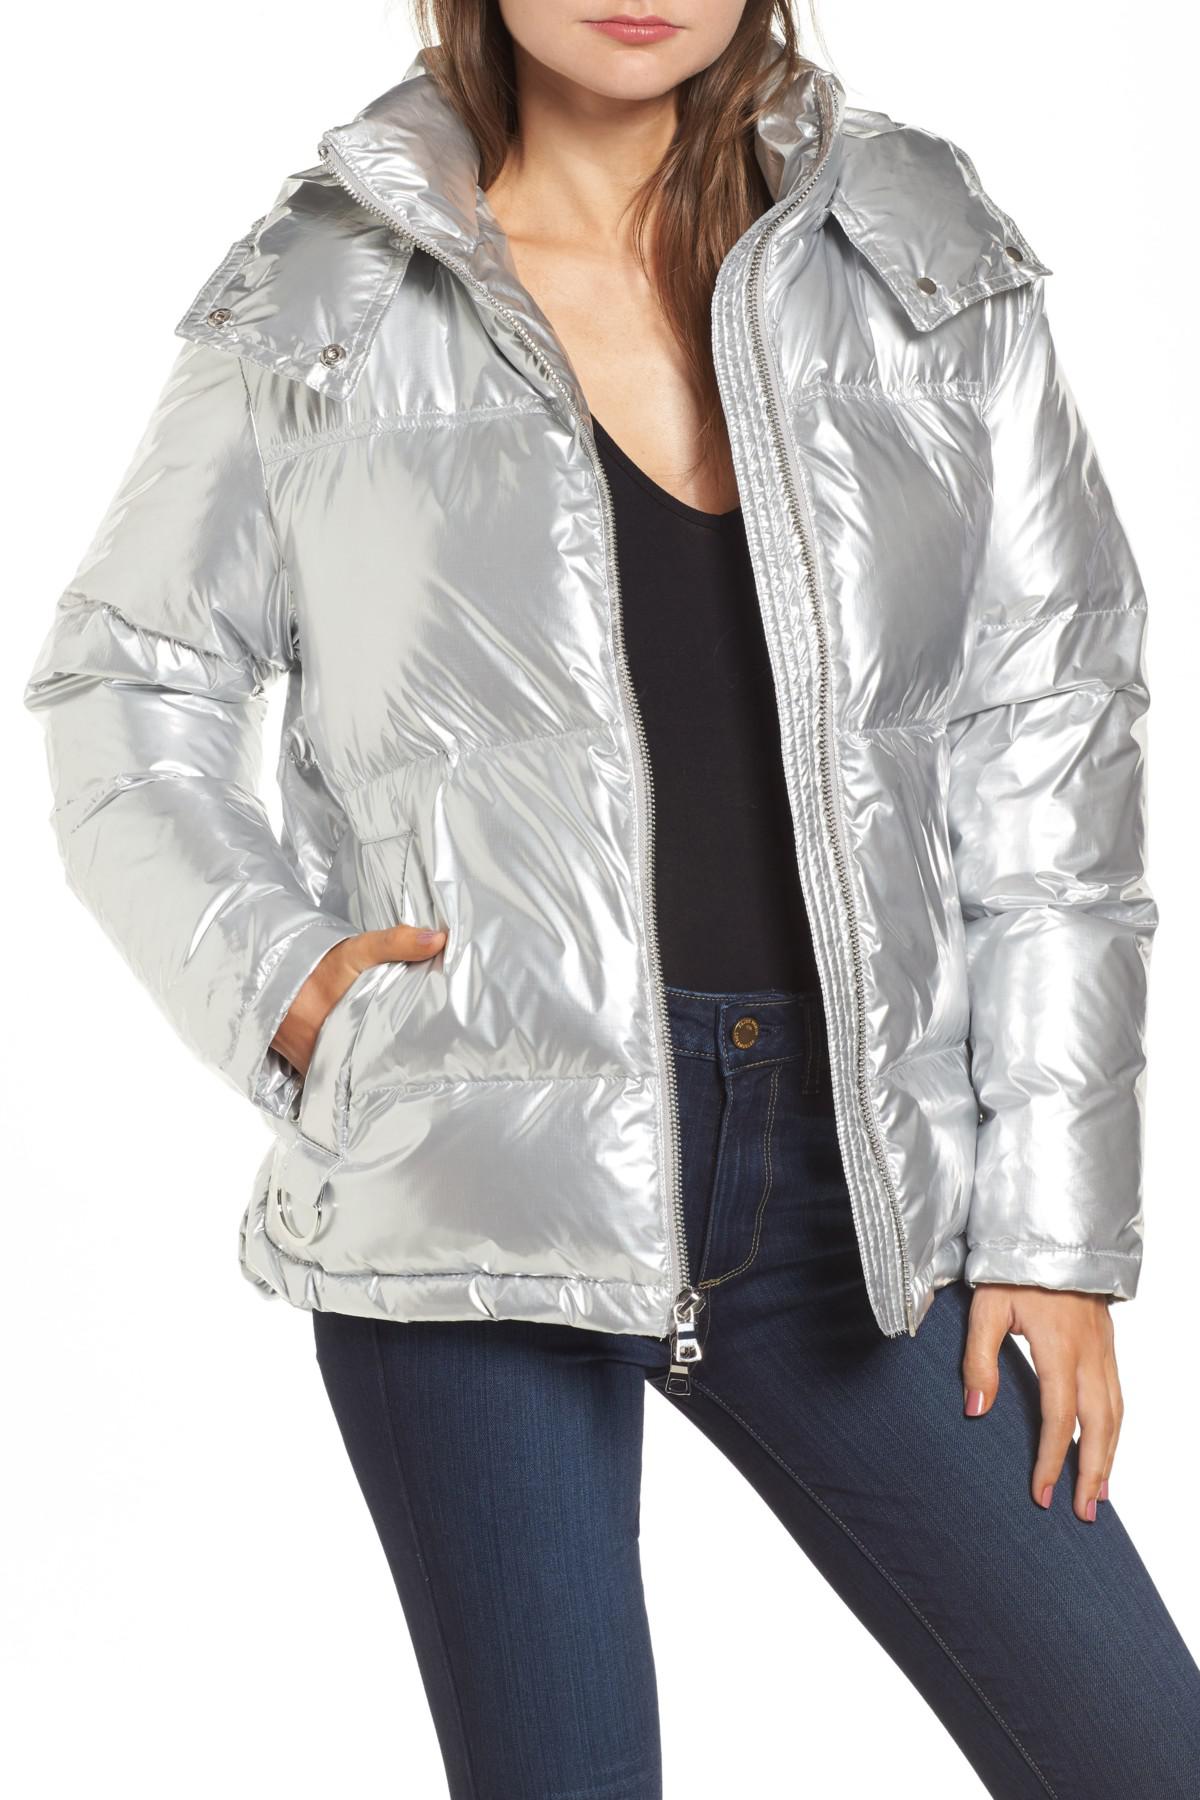 Kendall + Kylie Shiny Puffer Jacket in Silver (Metallic) - Lyst